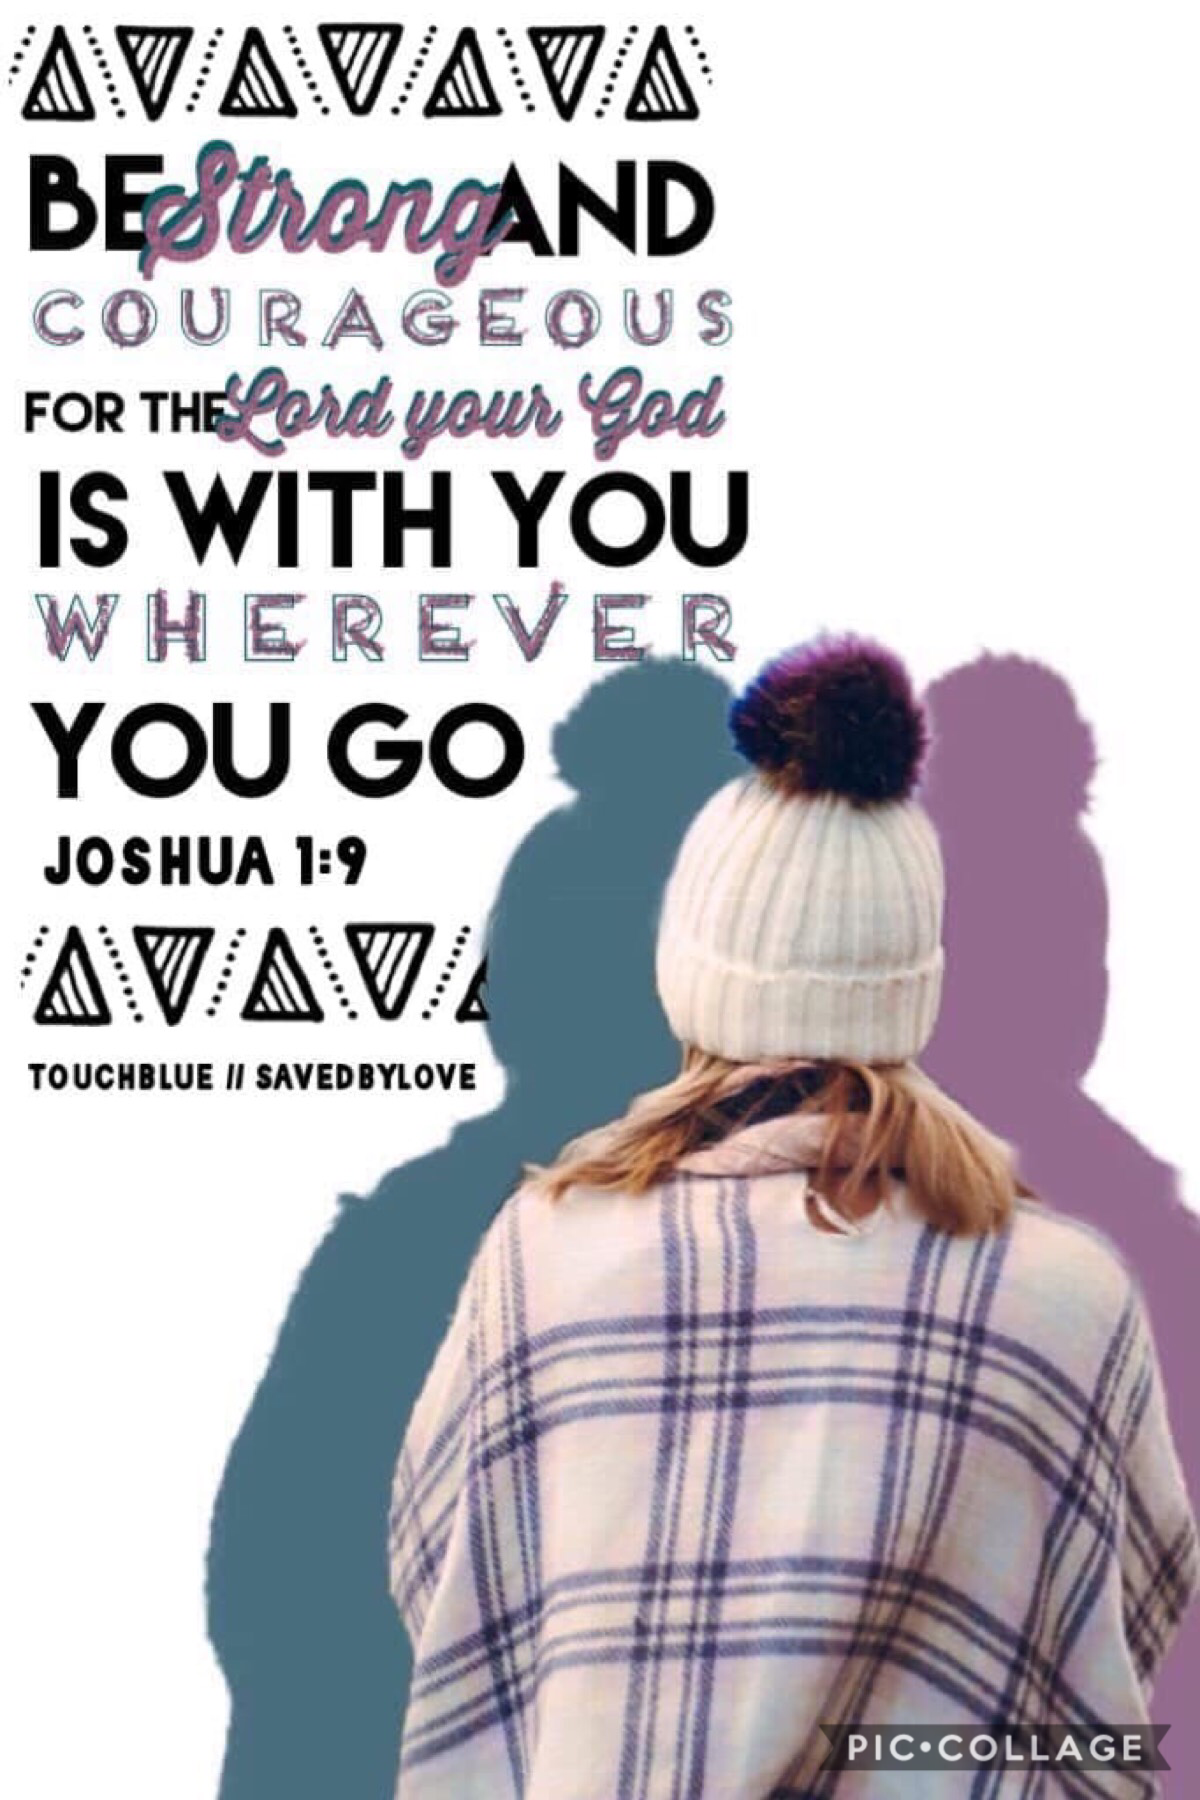 COLLAB WITH THE AMAZING... 🥁 
SavedByLove!!!!!  Go follow her she makes amazing Christian collages! She found the background and quote and I did the text! 
Qotd: how do you get featured? And how many do you have?
